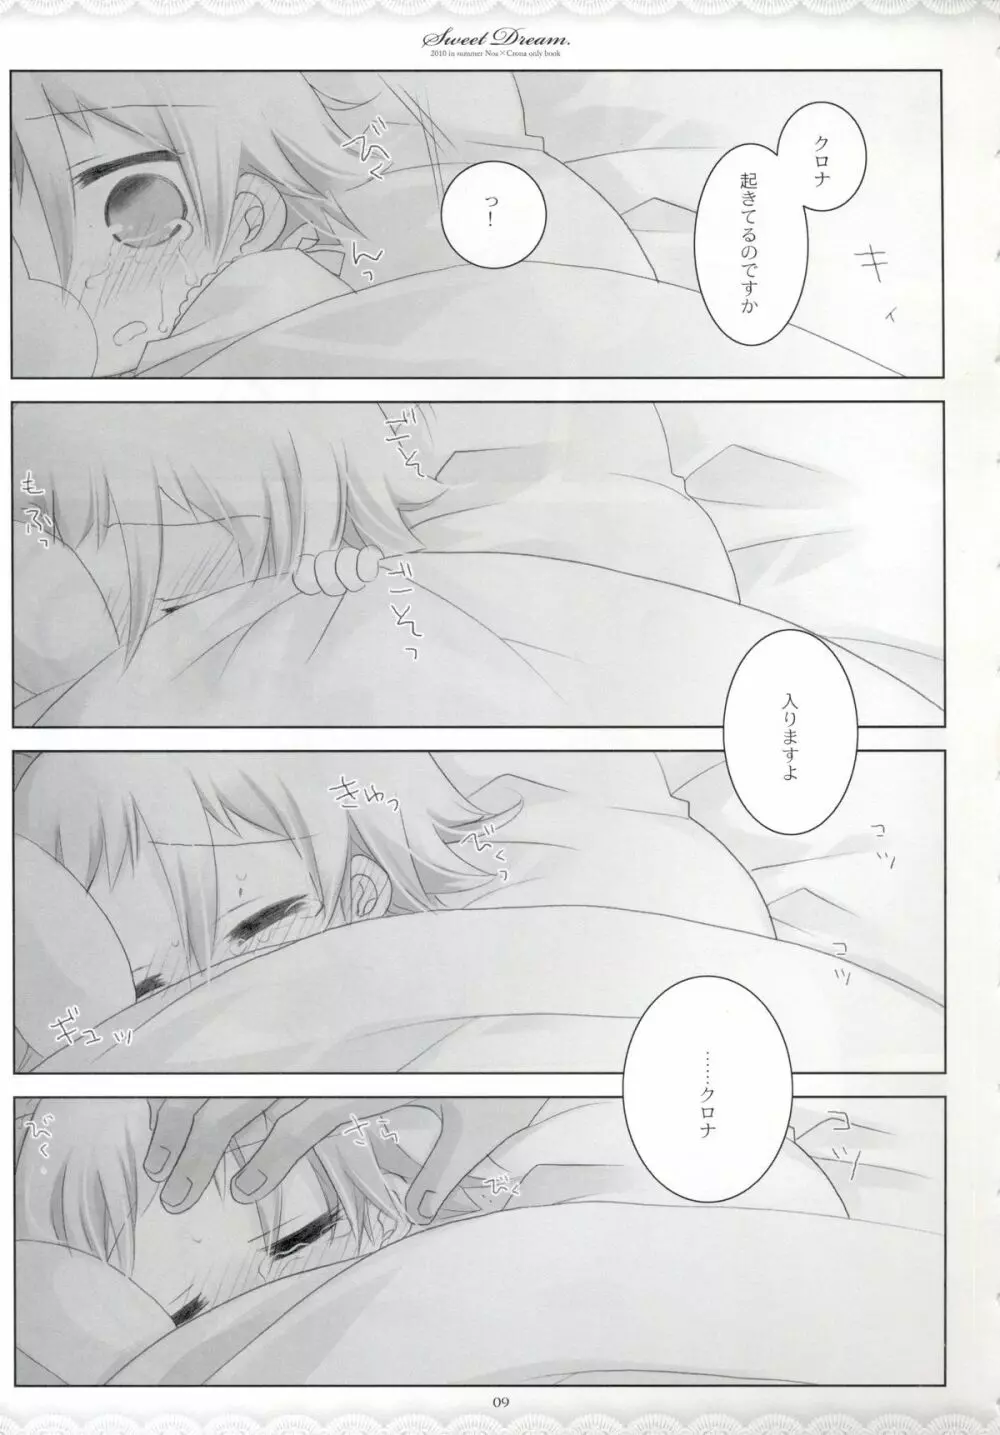 SWEET DREAM - page8